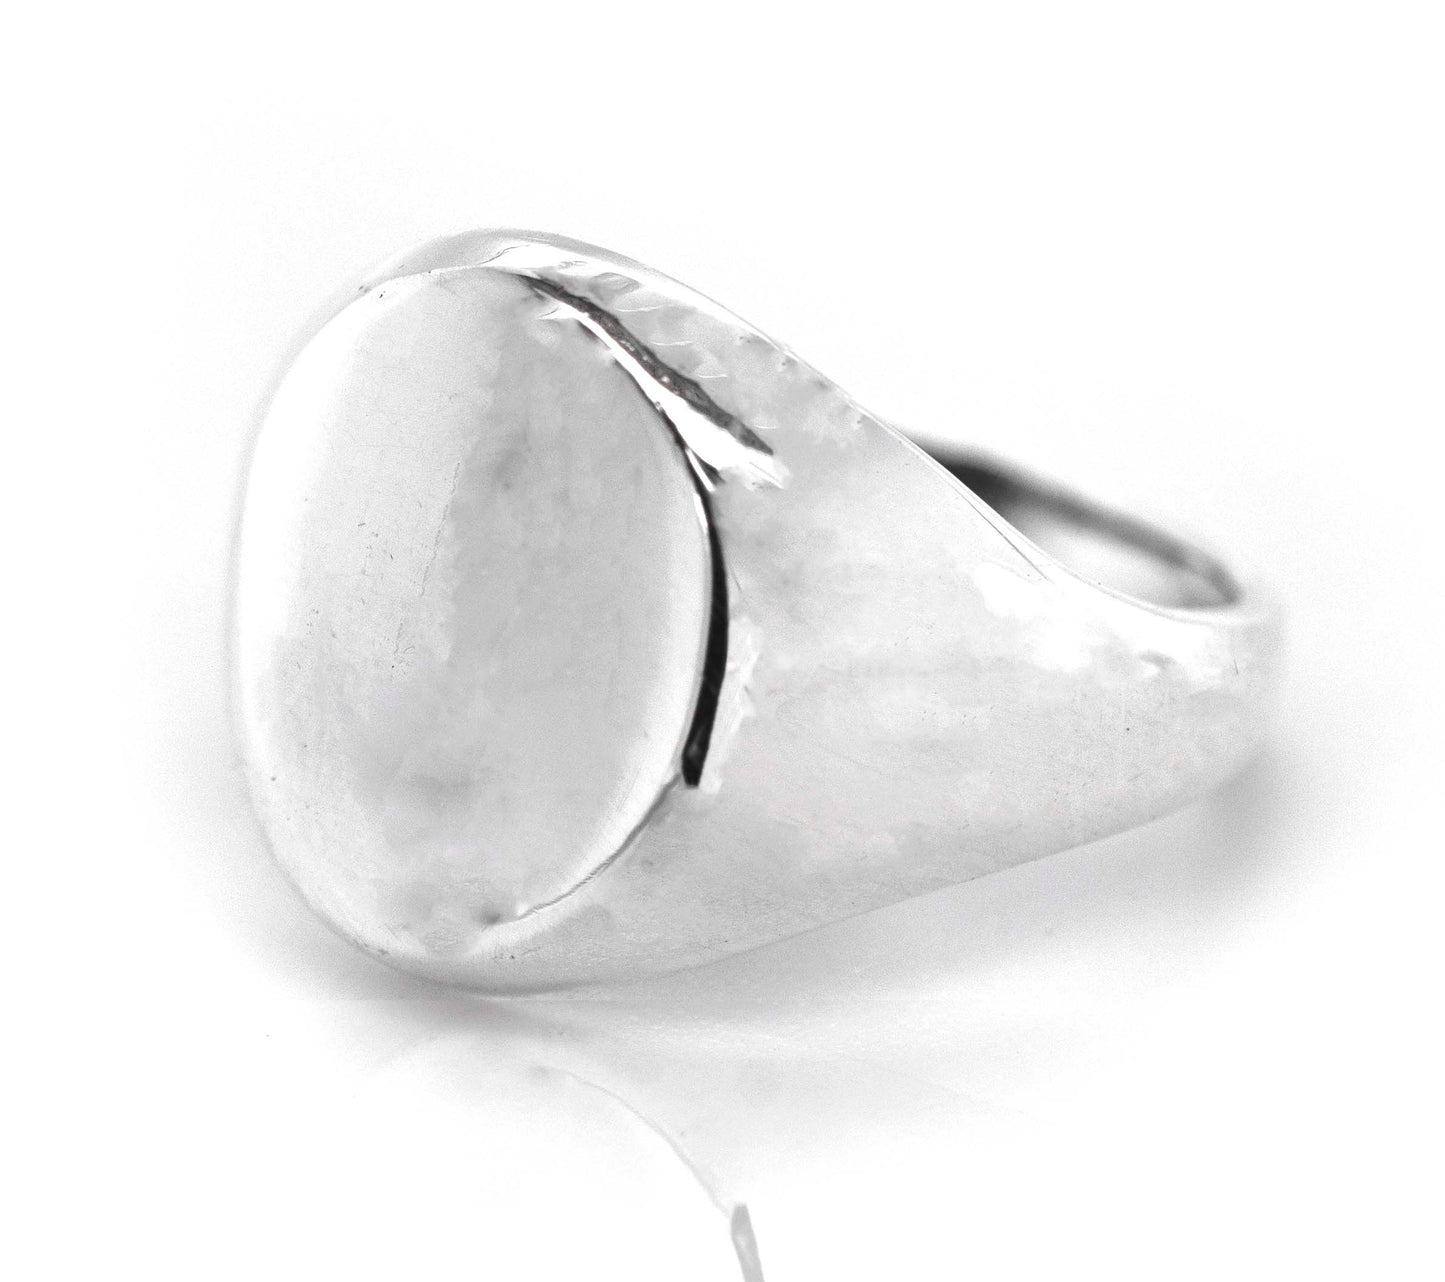 An engraved Super Silver oval signet ring, perfect for everyday wear, displayed on a white background.